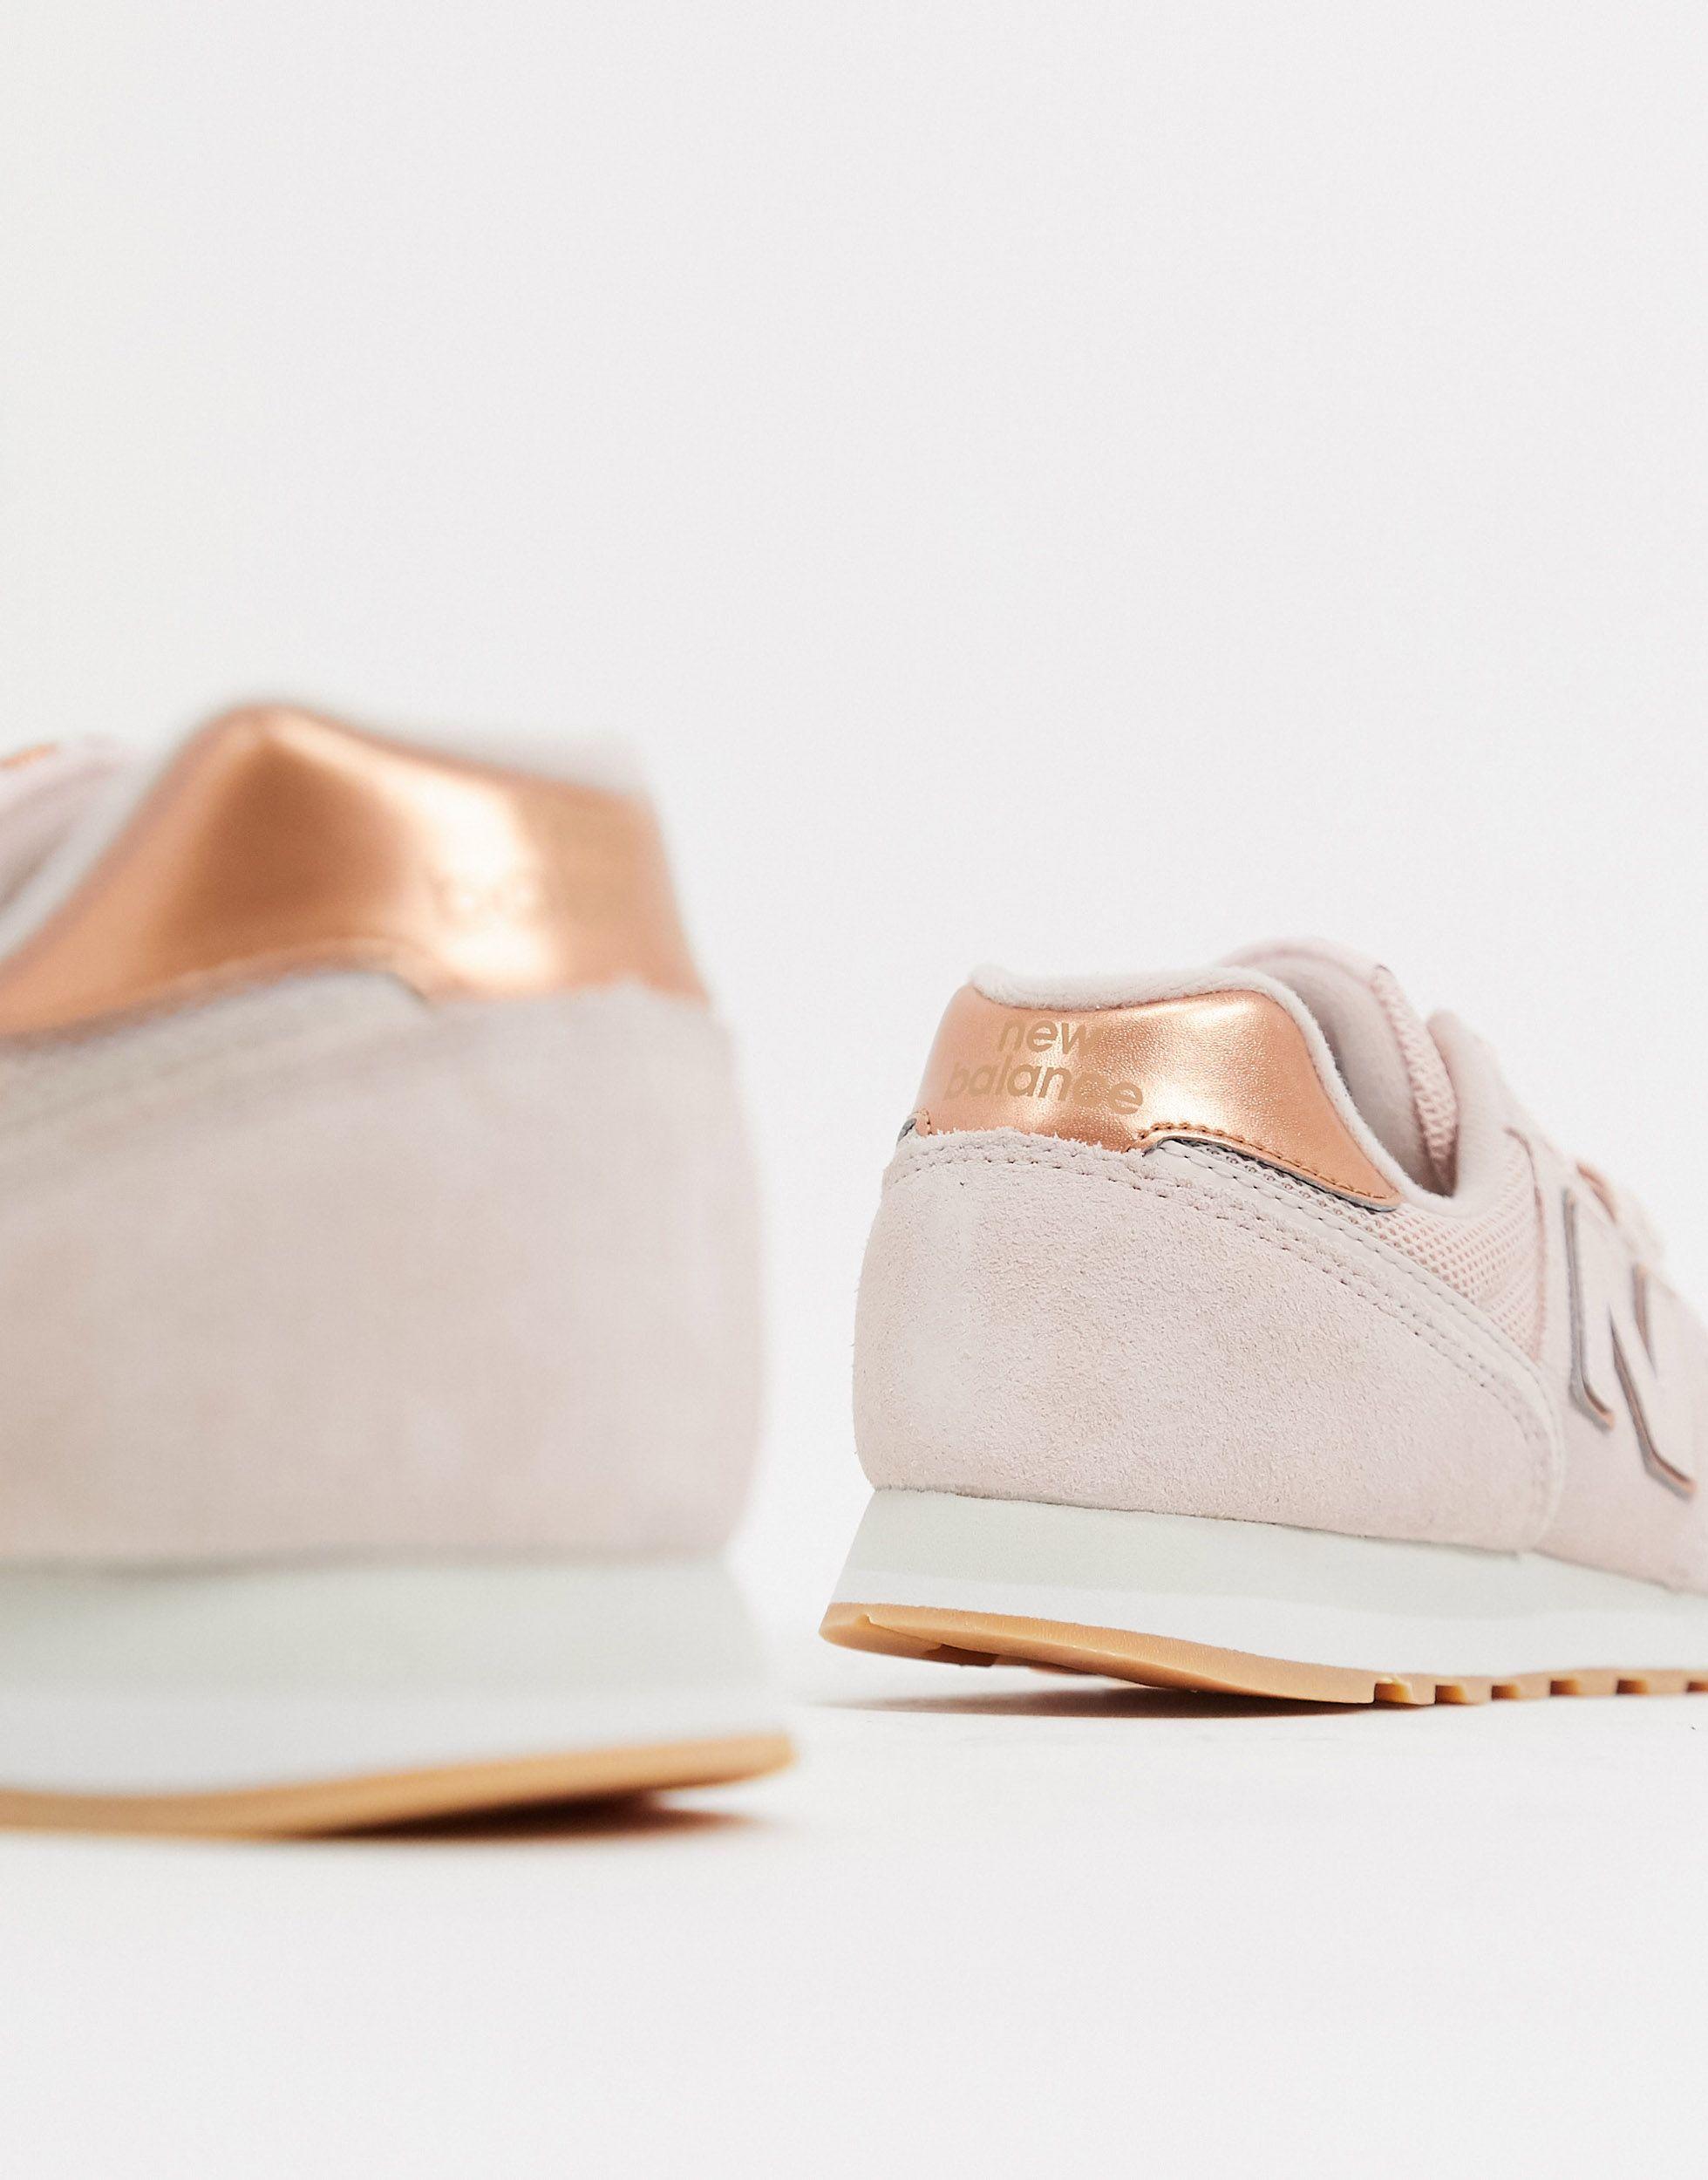 Contable Playa Derrotado New Balance 373 Womens Pink / Rose Gold Trainers | Lyst